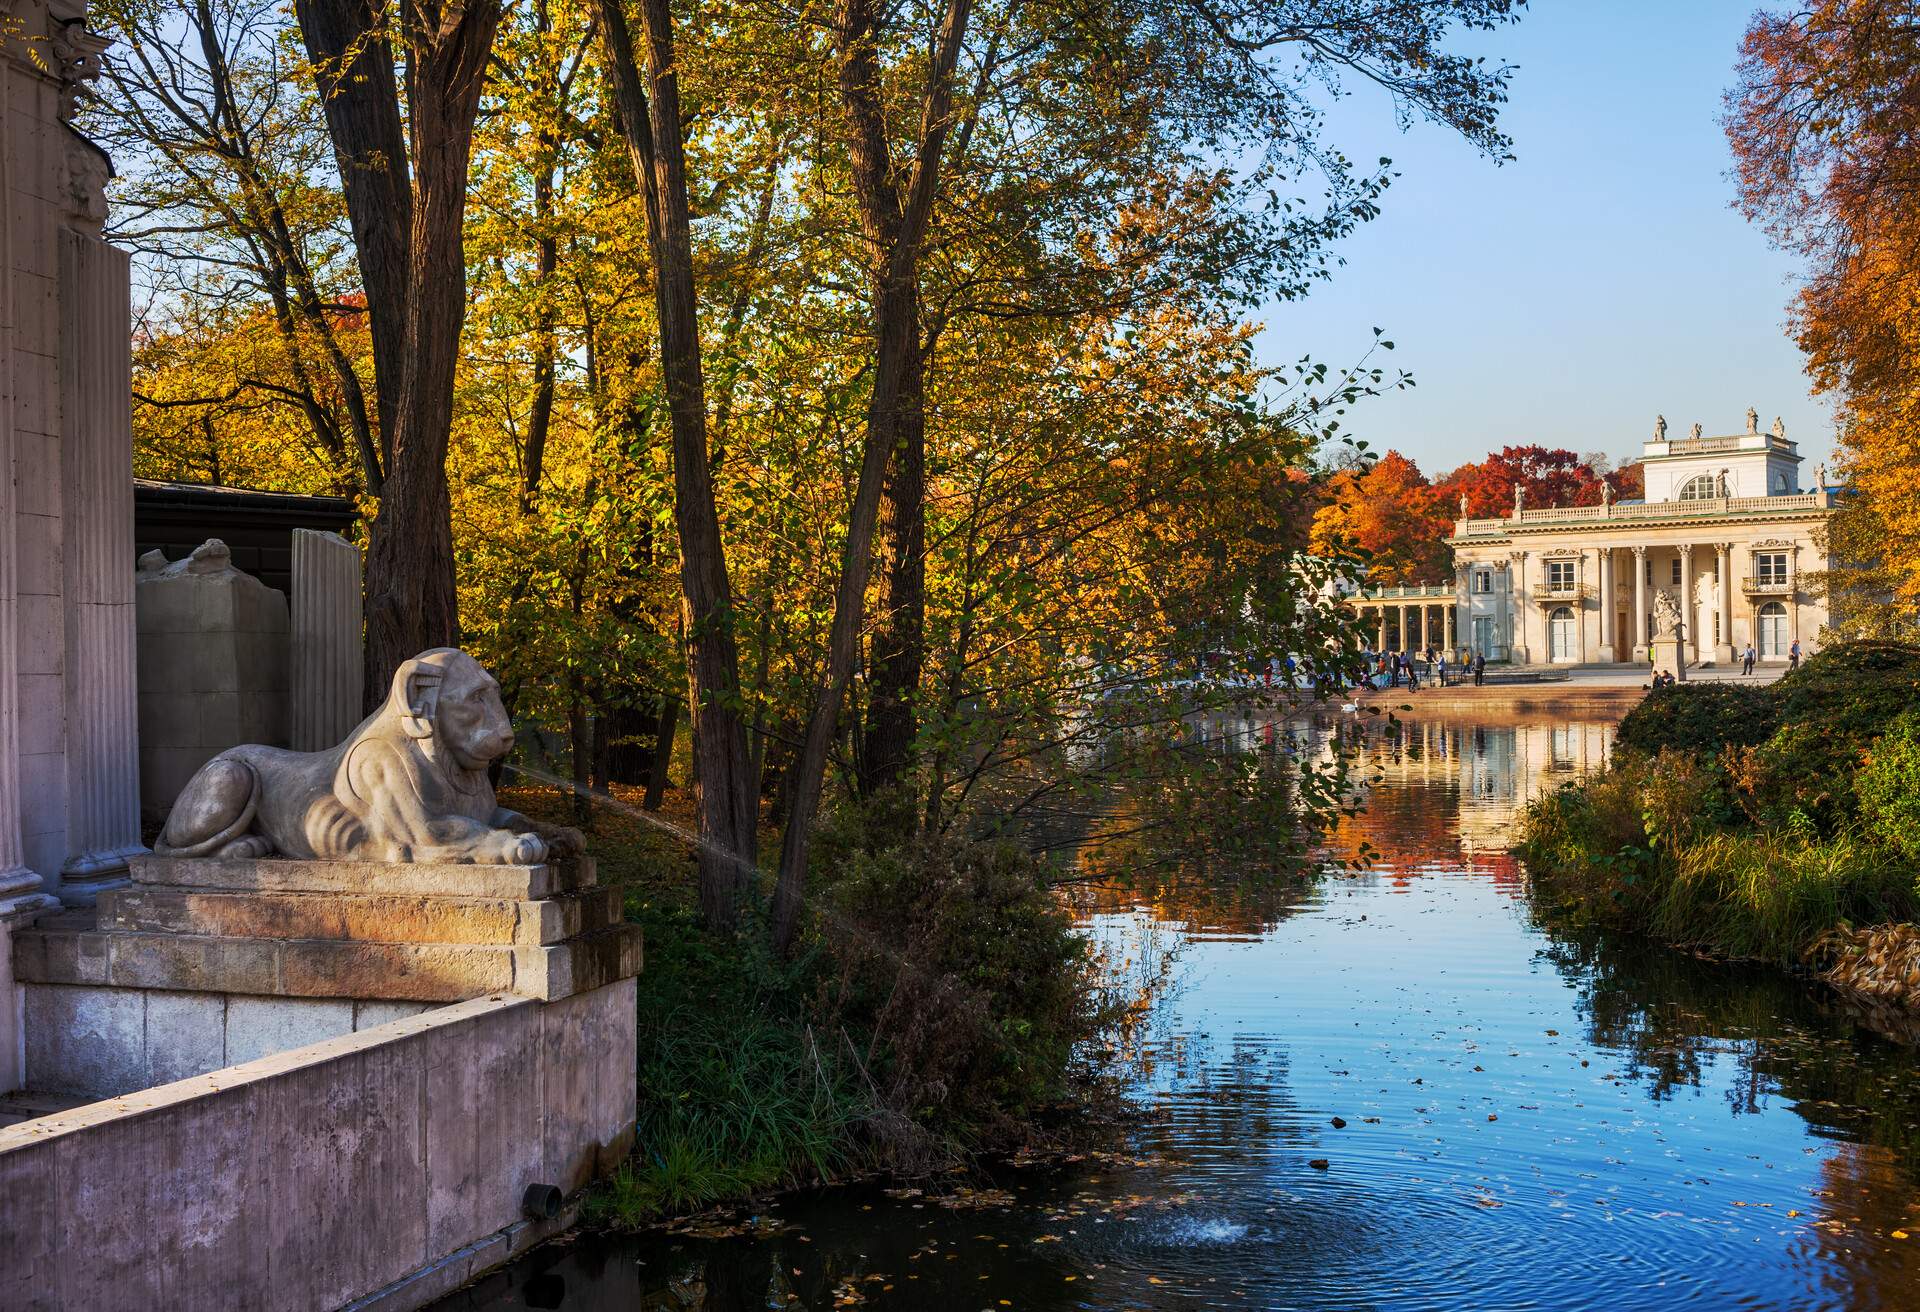 Lazienki Park in Warsaw, Poland, Royal Baths Park with lake and autumn trees, Palace on the Isle (Palace on the Water) from 17th century at the far end.